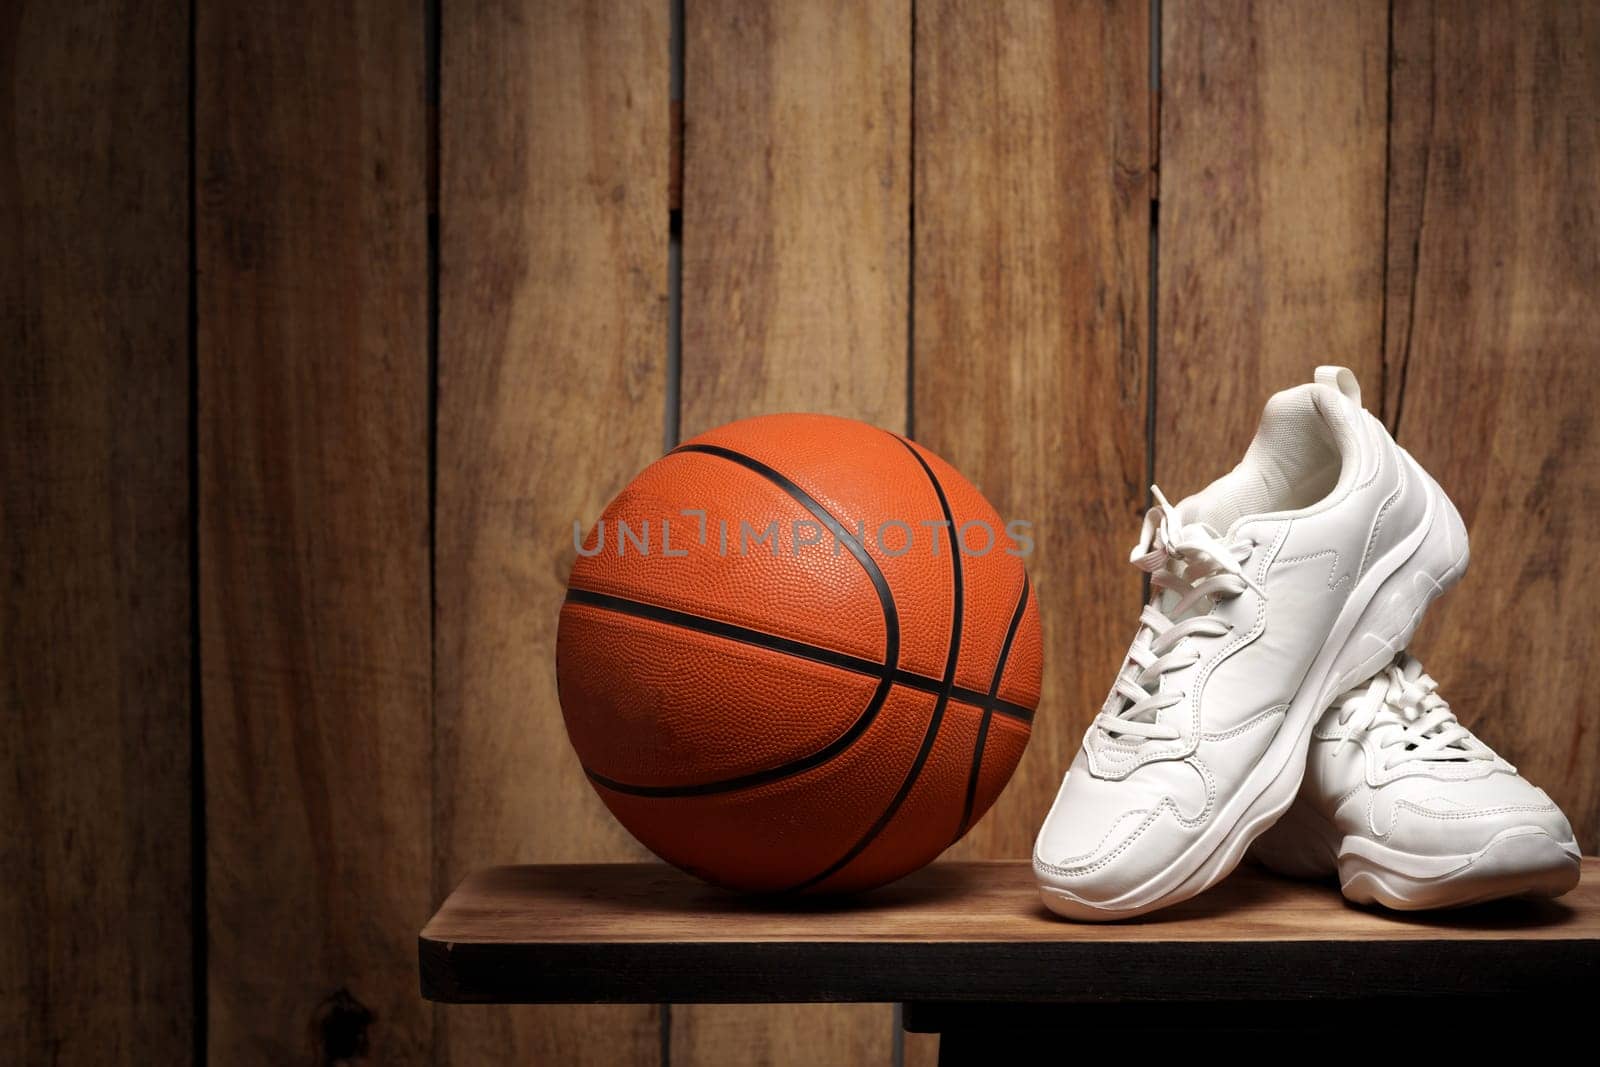 White sneakers and basketball ball against wooden background by Fabrikasimf